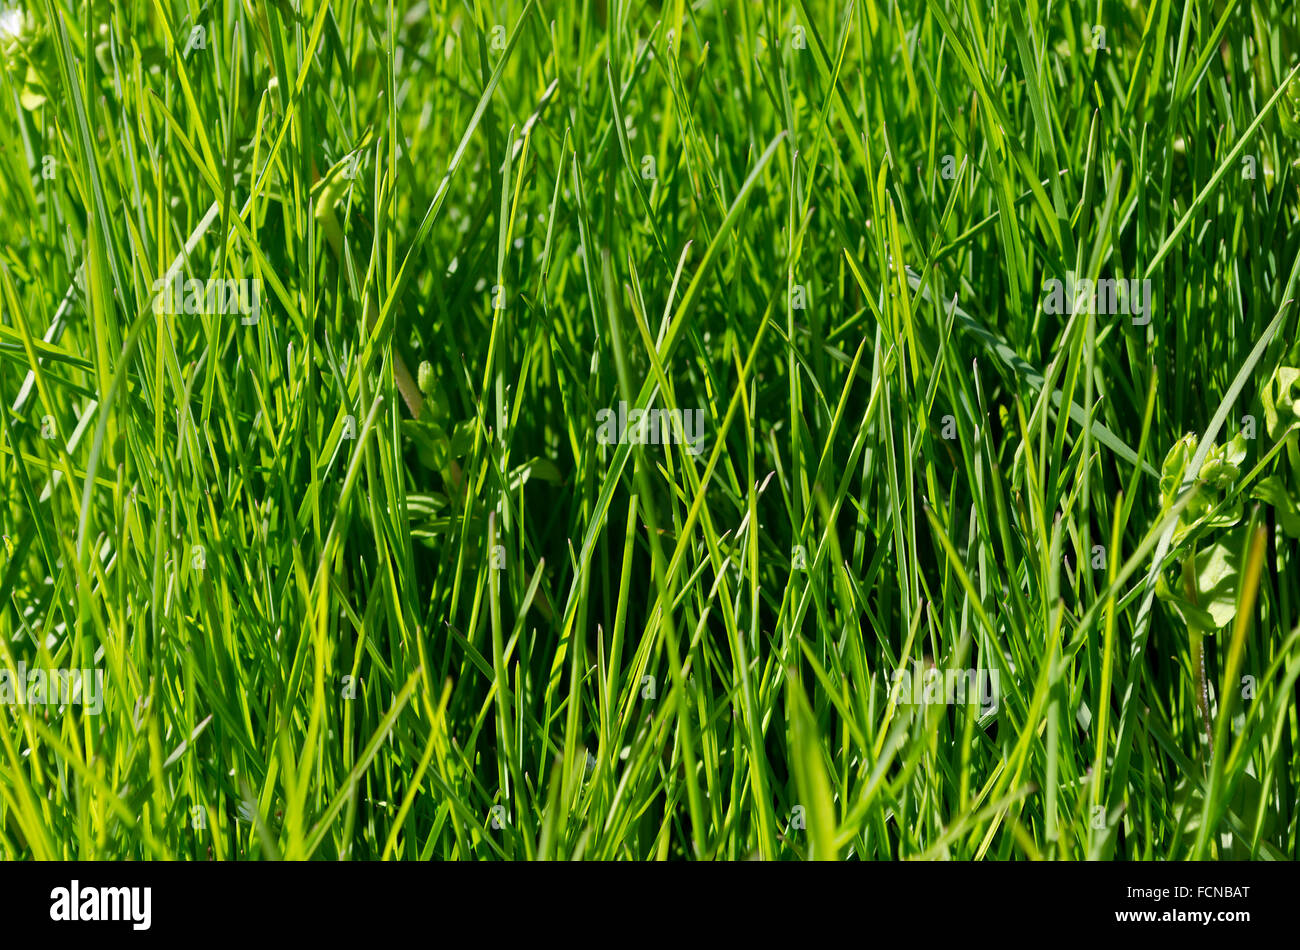 Vibrant green grass close-up with DOF focus Stock Photo